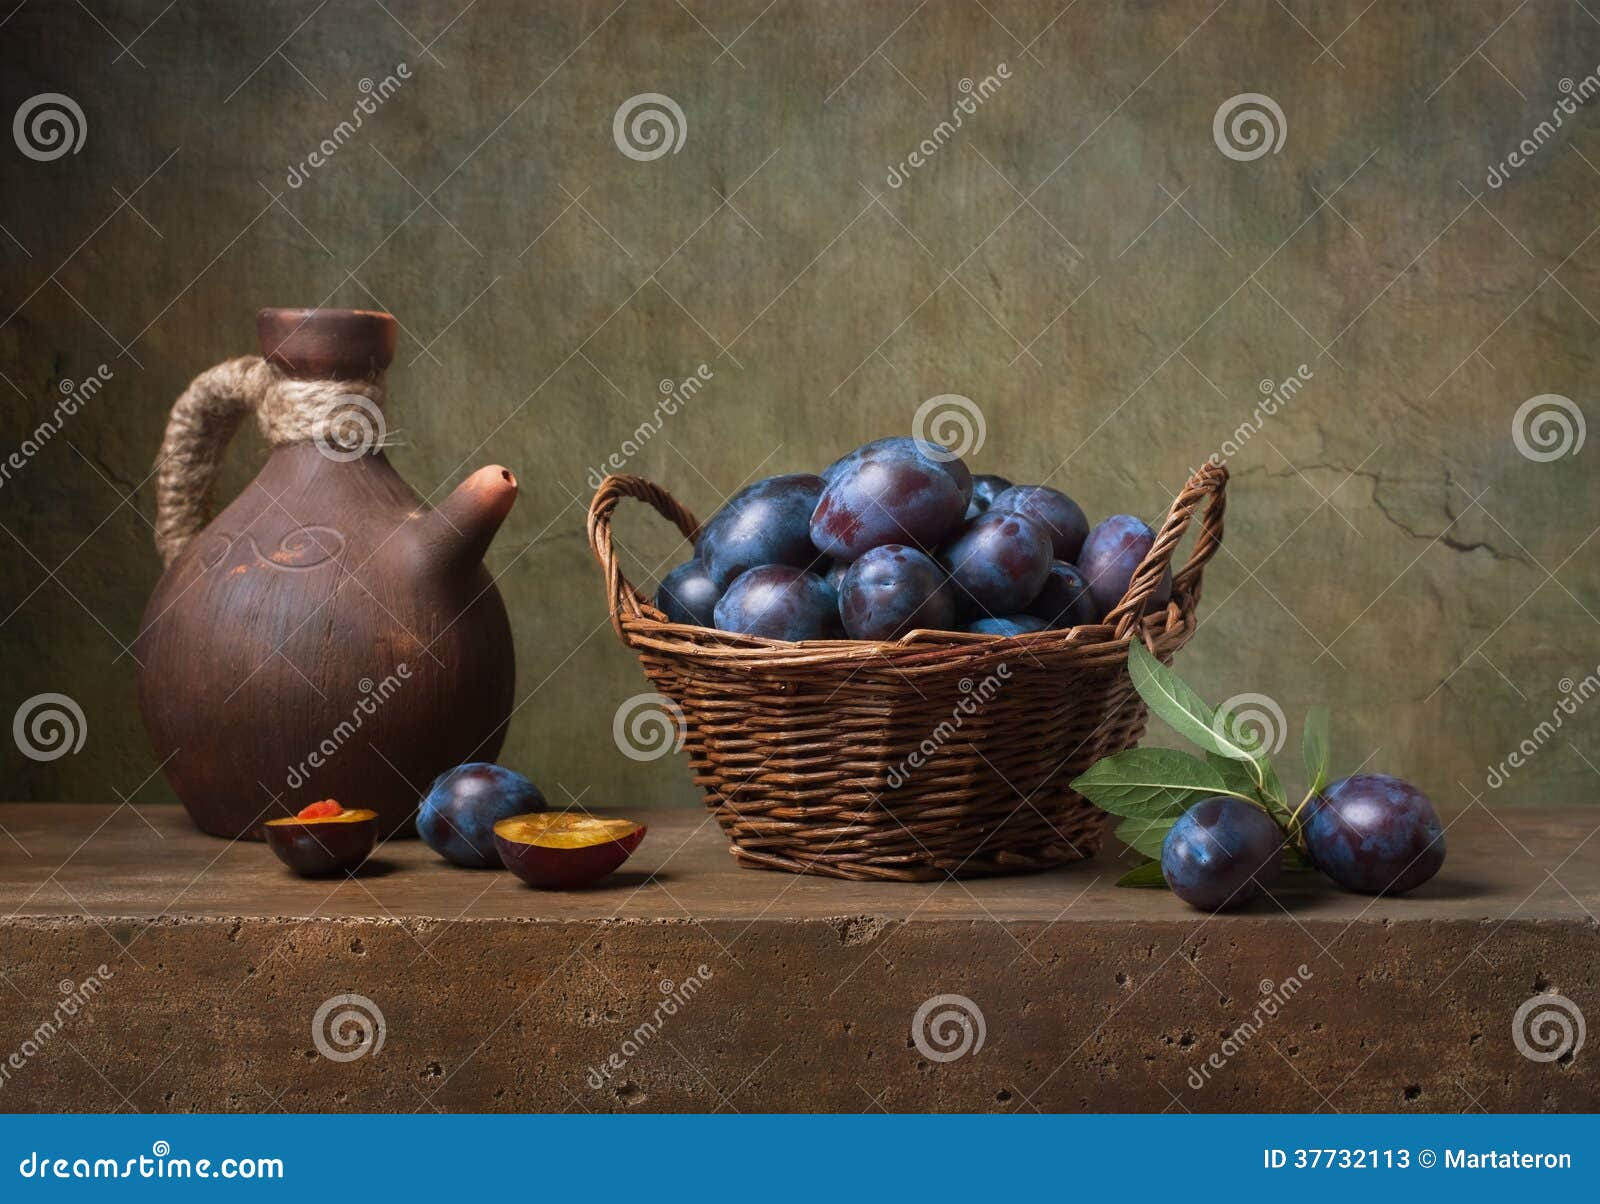 still life with black plums in a basket